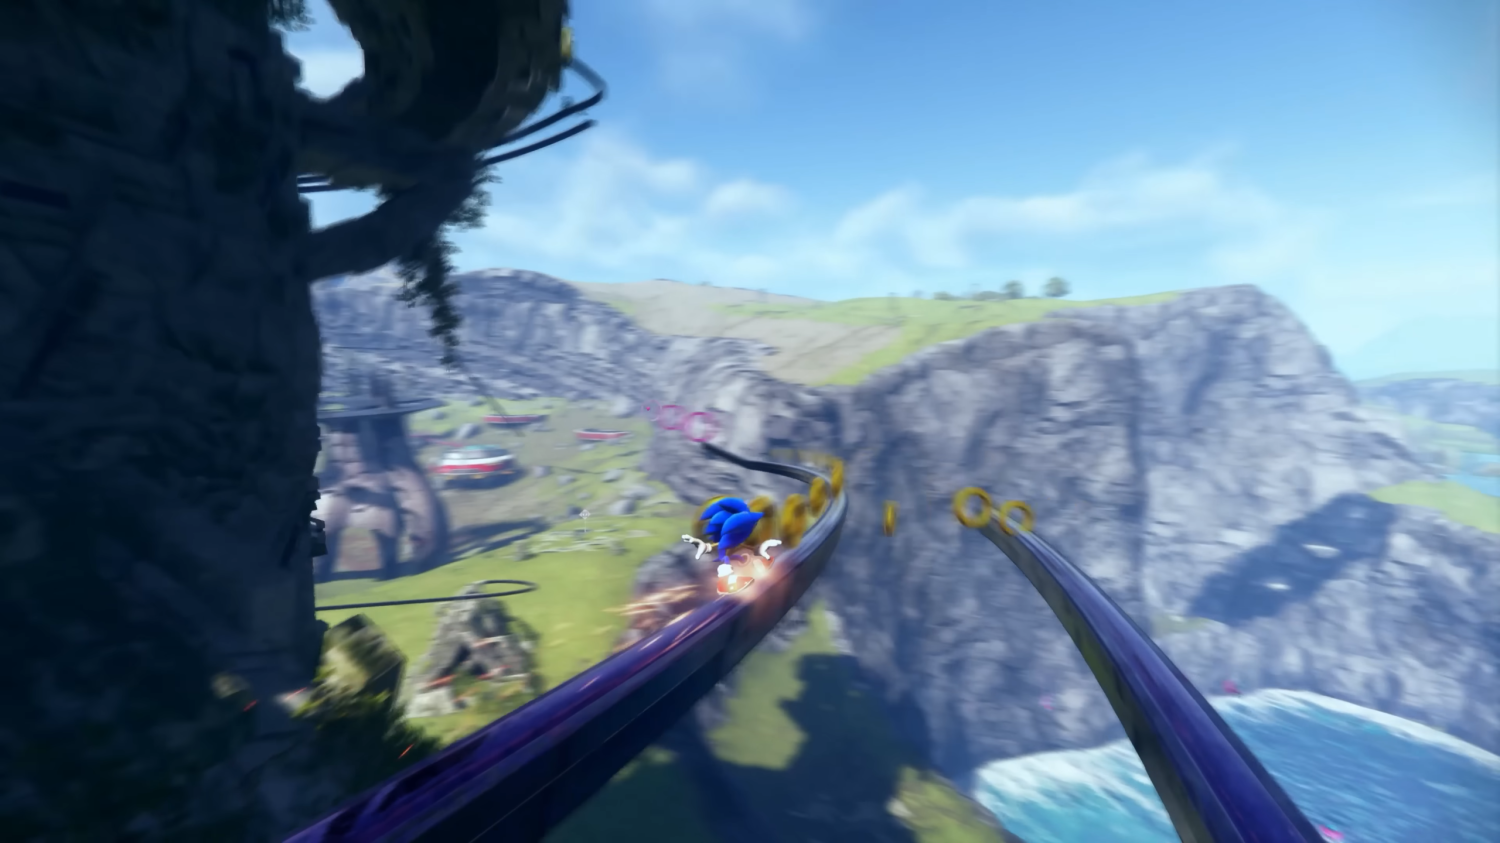 sonic frontiers: Video game Sonic Frontiers – Nintendo switch file size  revealed - The Economic Times